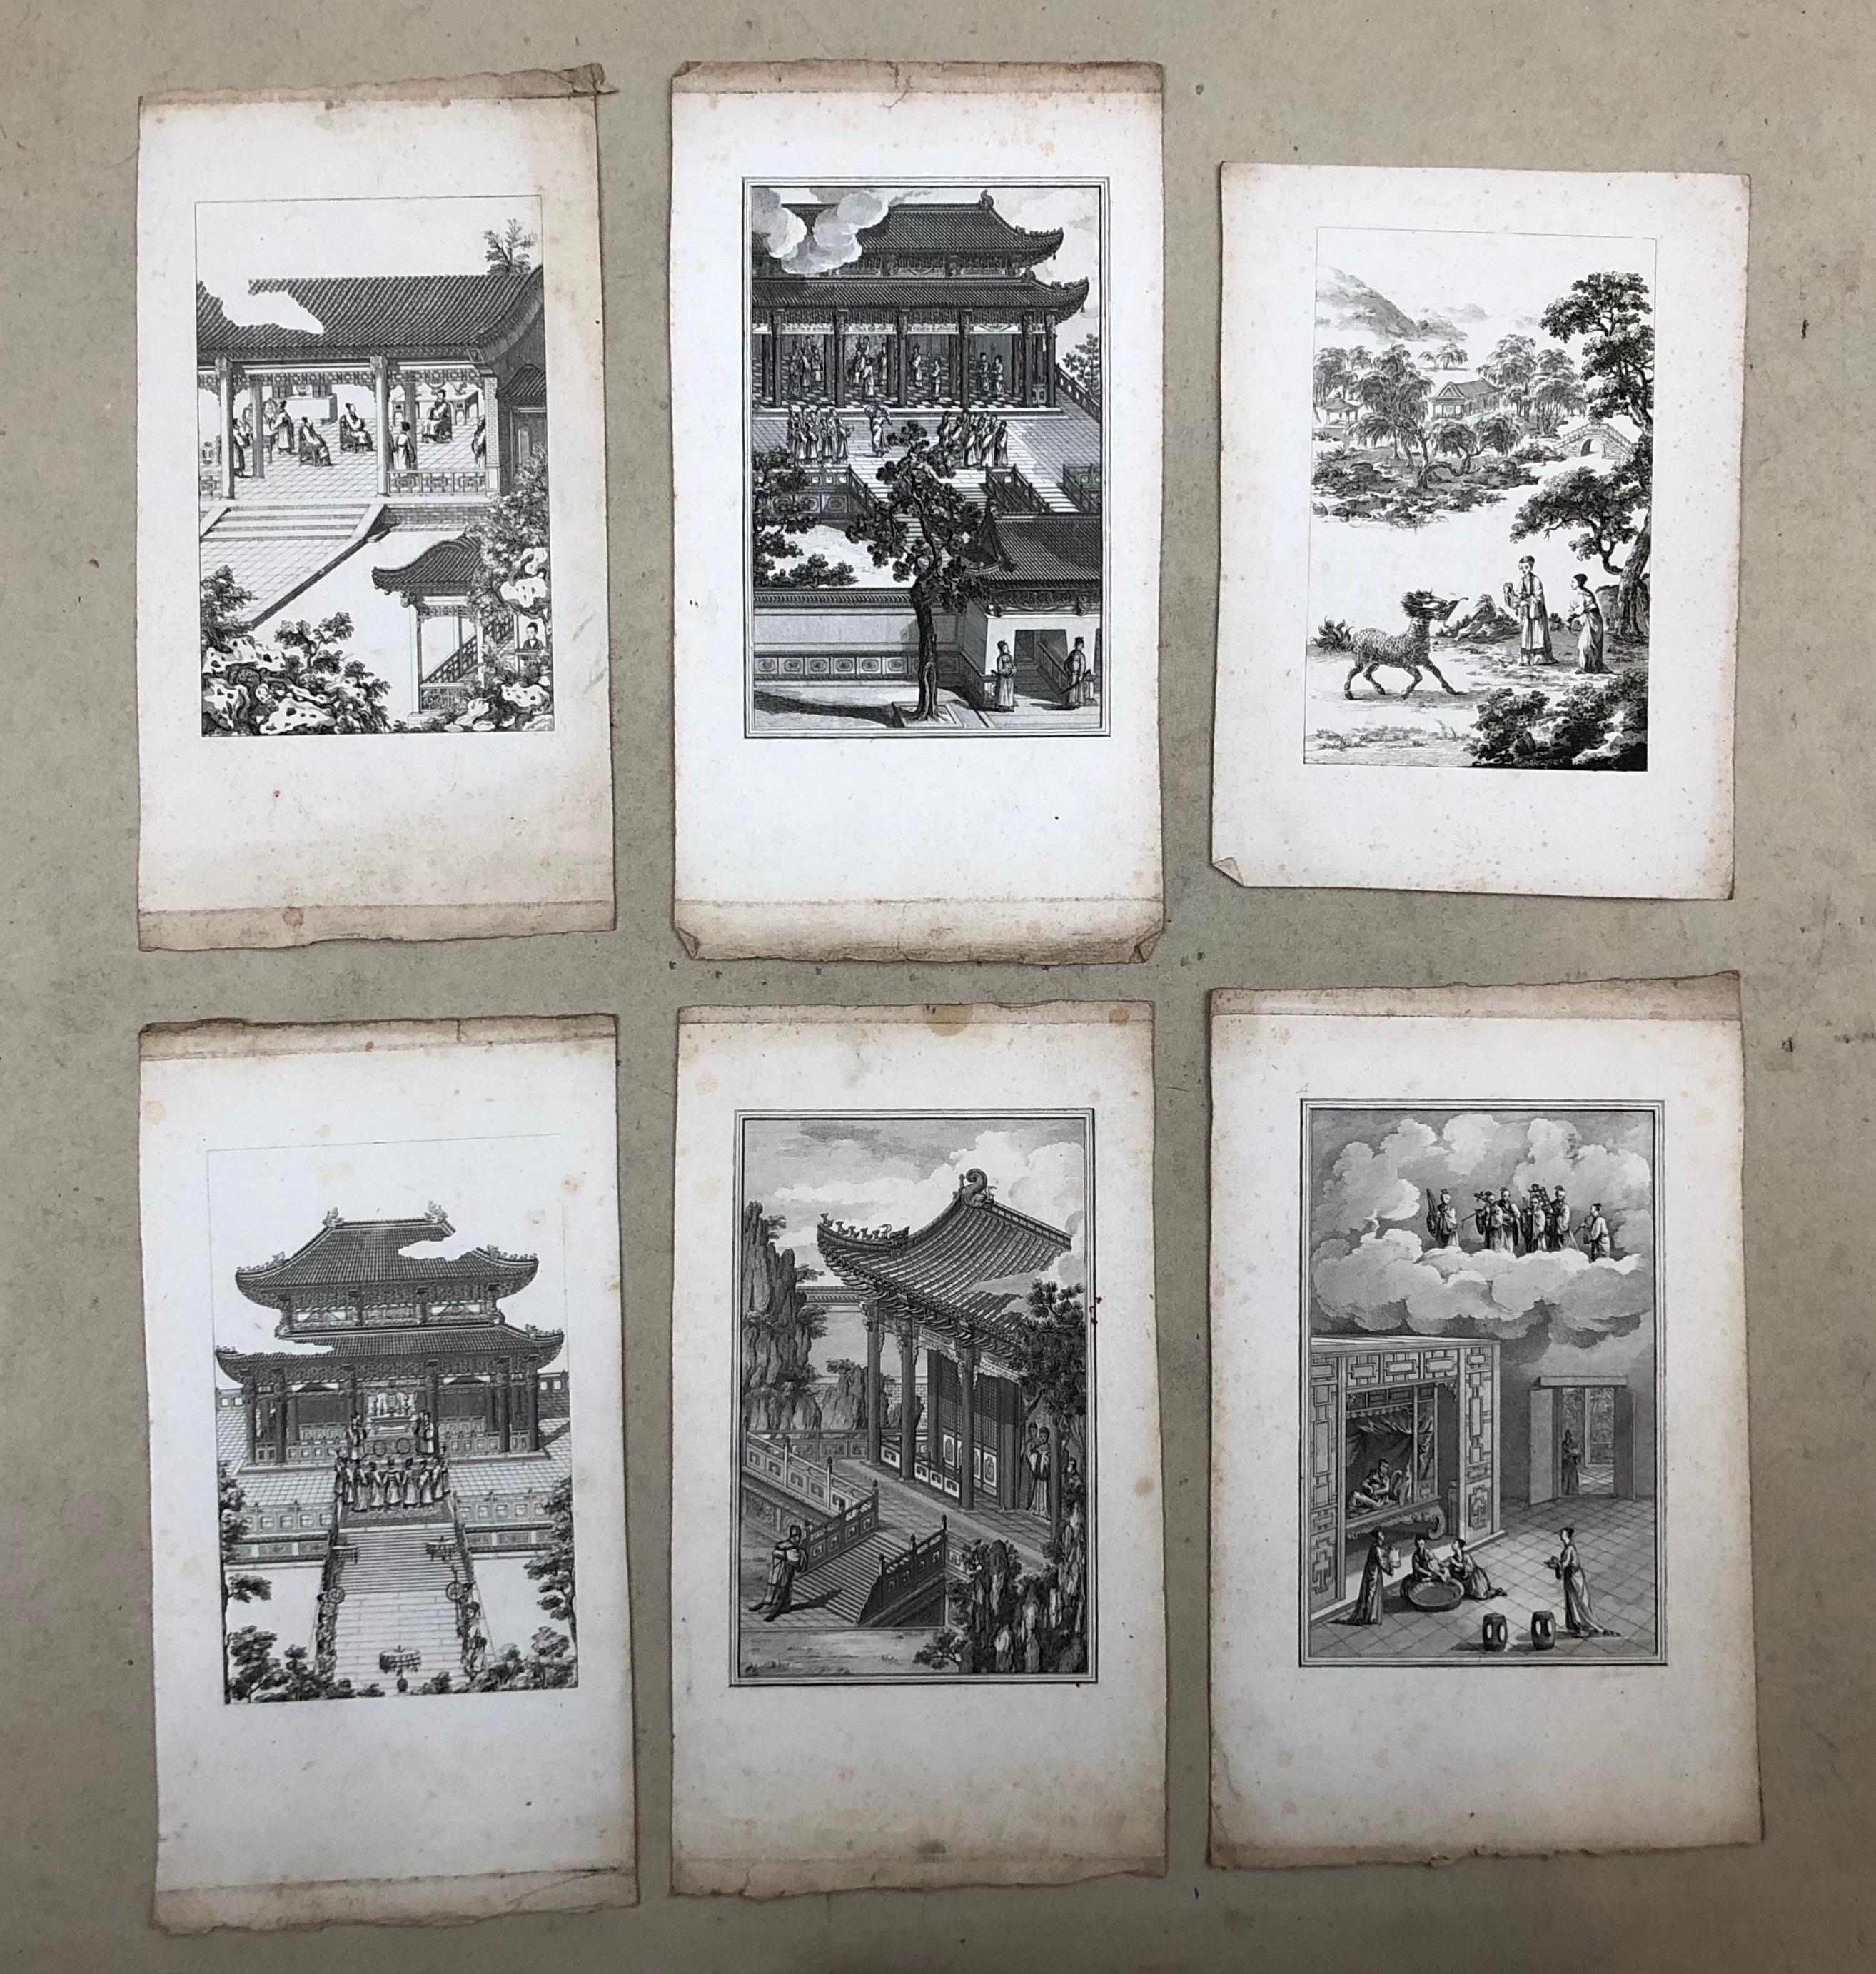 Scenes From Chinese Life, 6 Engravings Late 18th Century - Early 19th Century